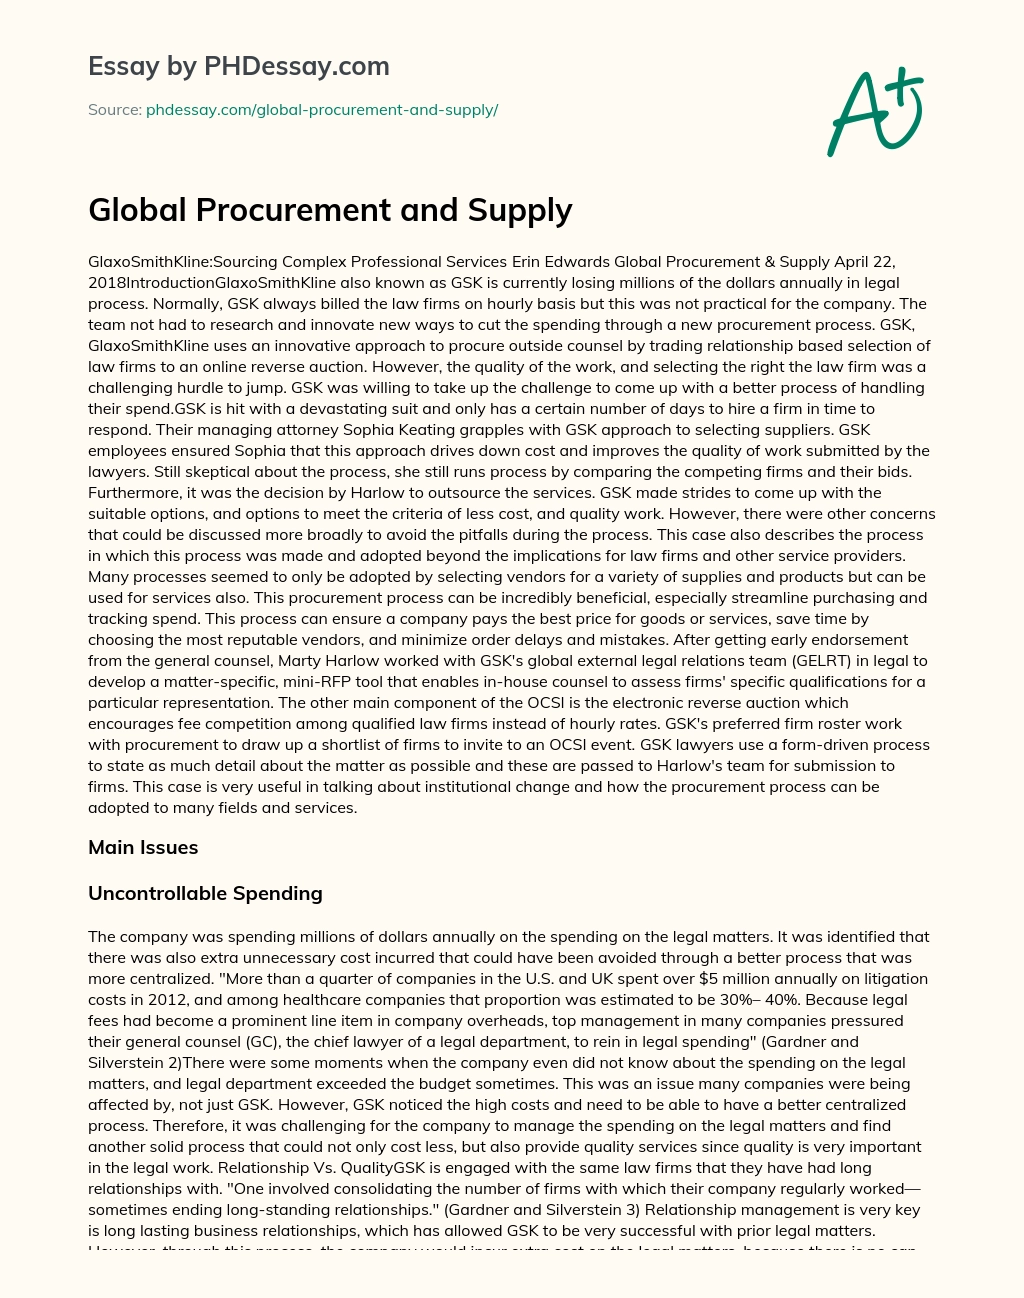 Global Procurement and Supply essay